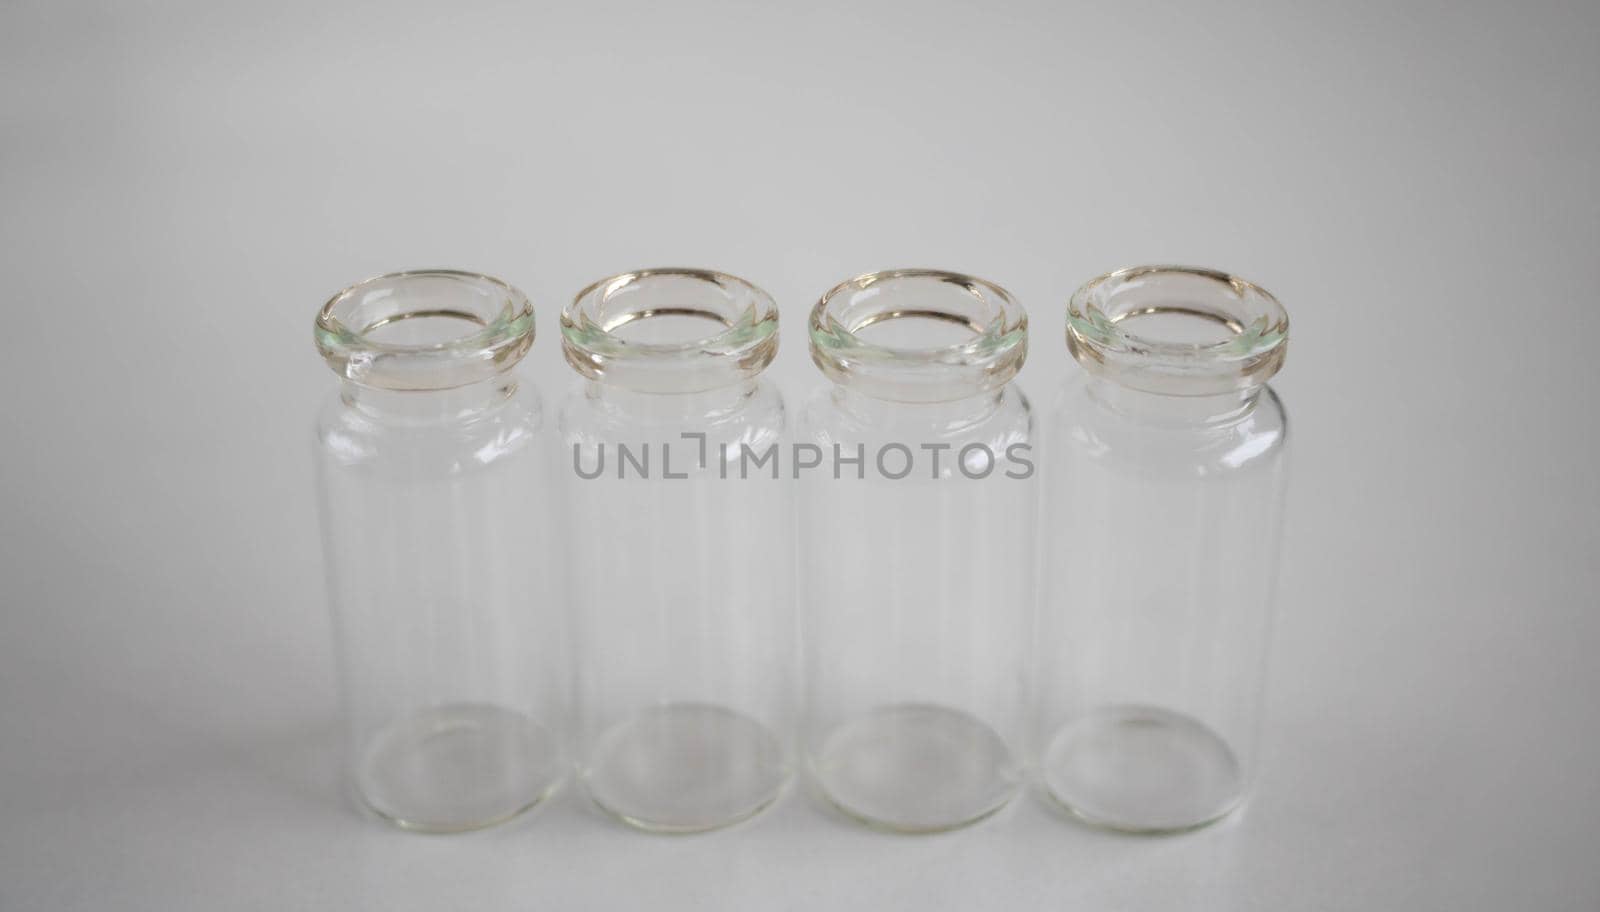 Empty glass bottles for storing medicines, liquids on a white background.